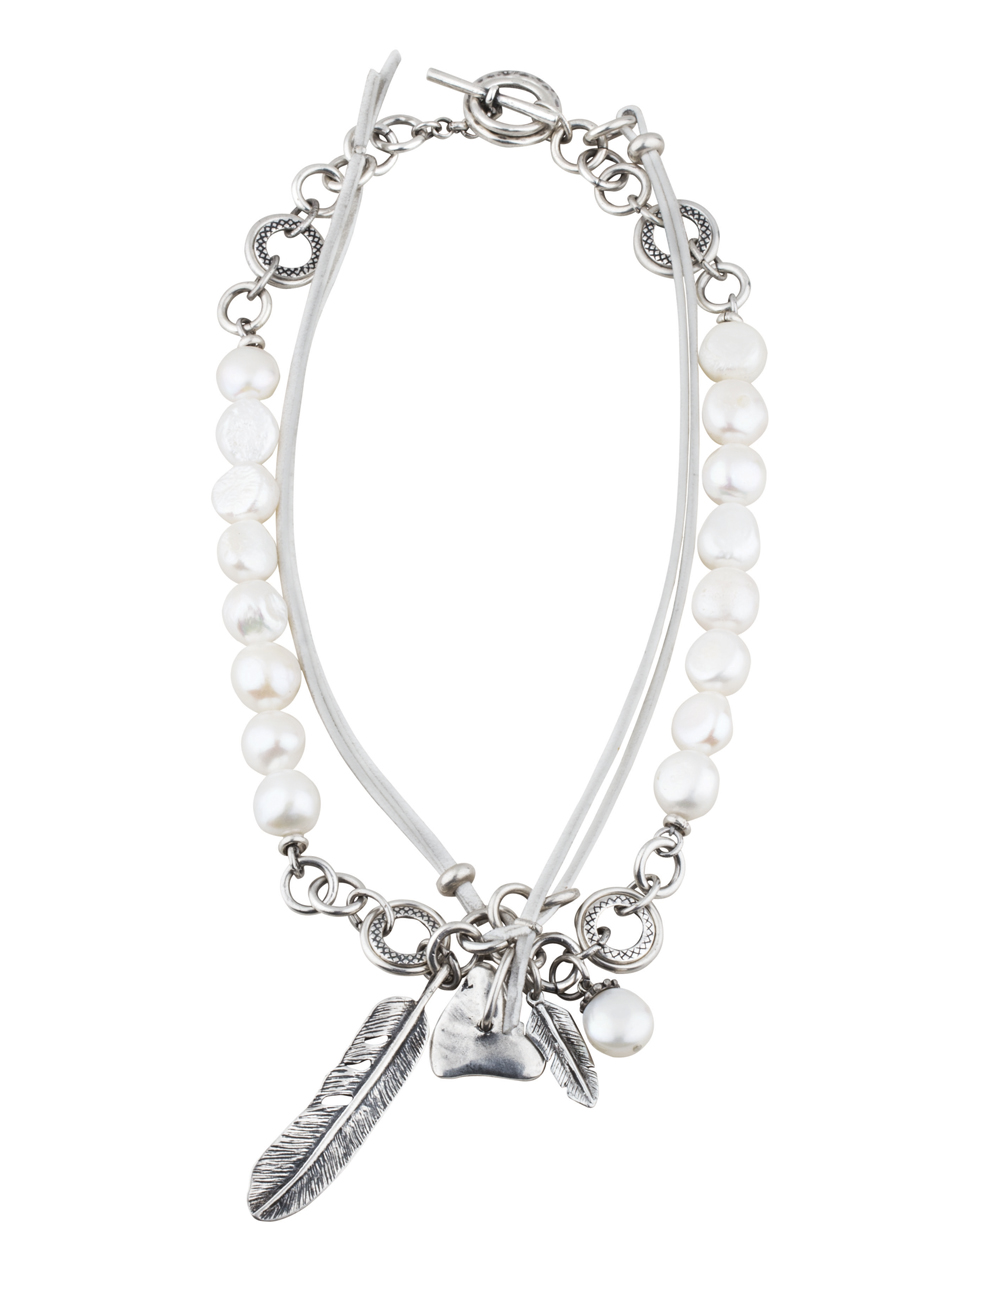 Necklace, $429, by Miglio.